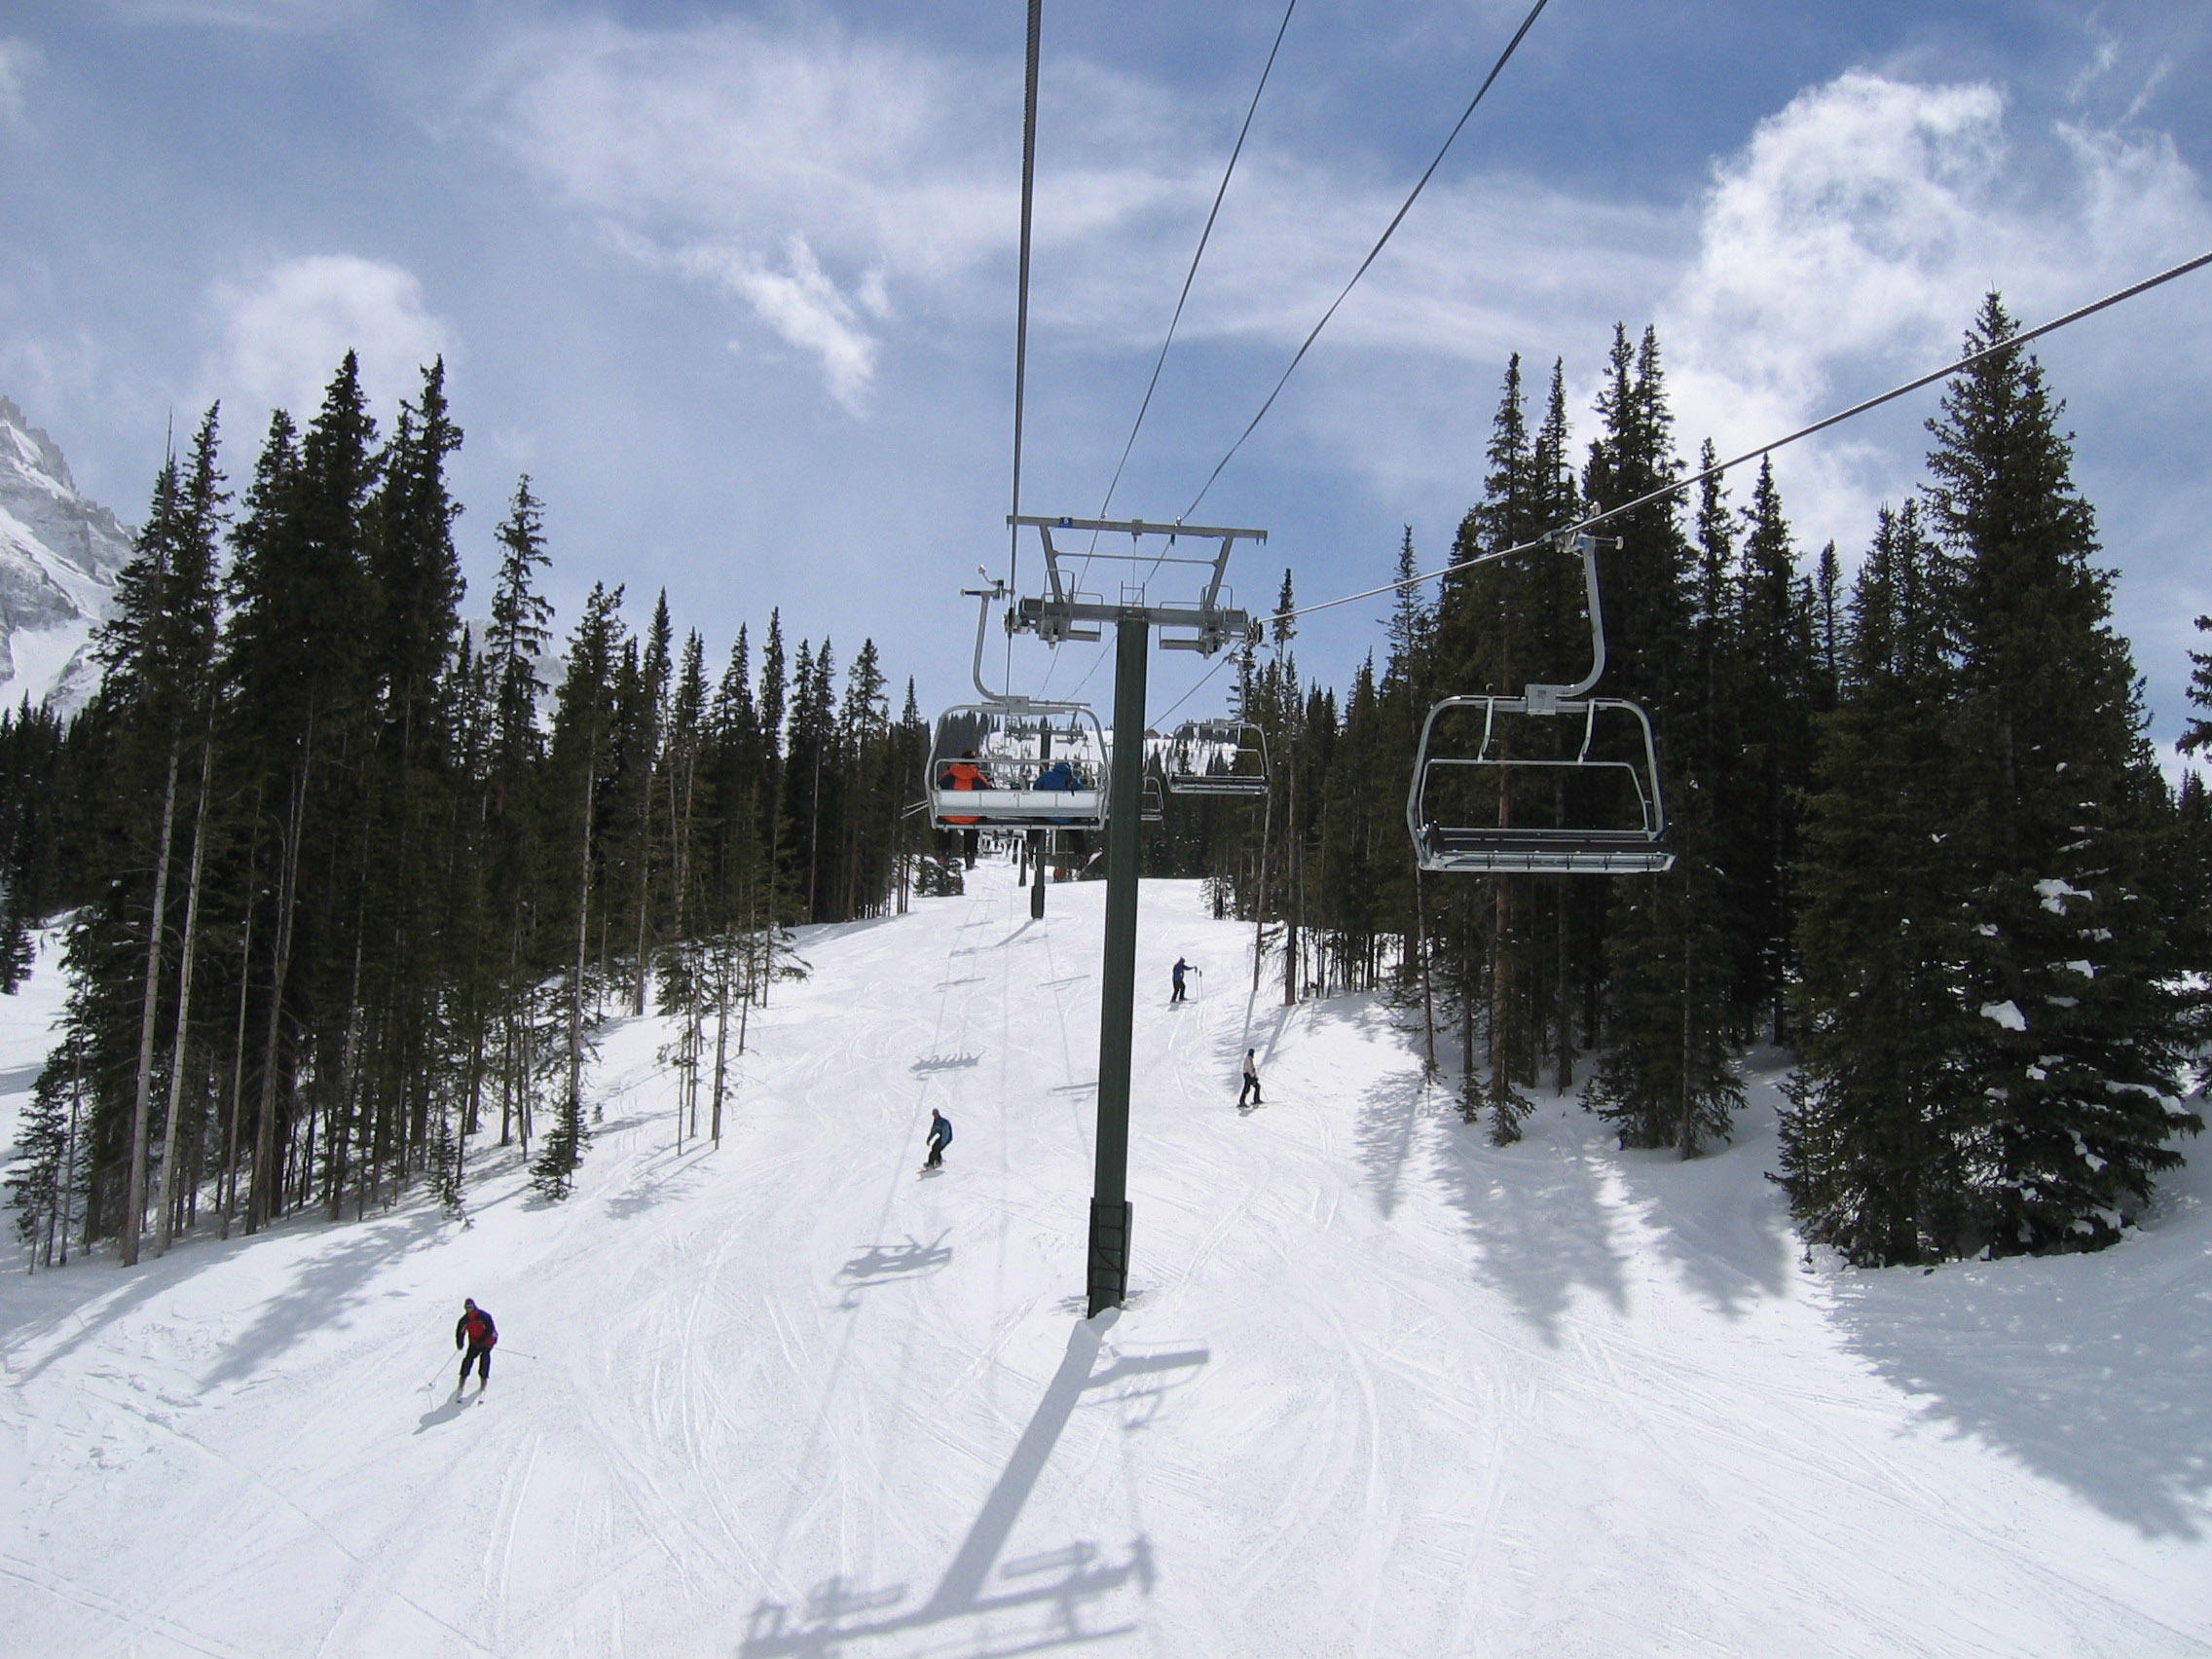 Chair Lift For Three Colony Homes Gets The OK | KPCW